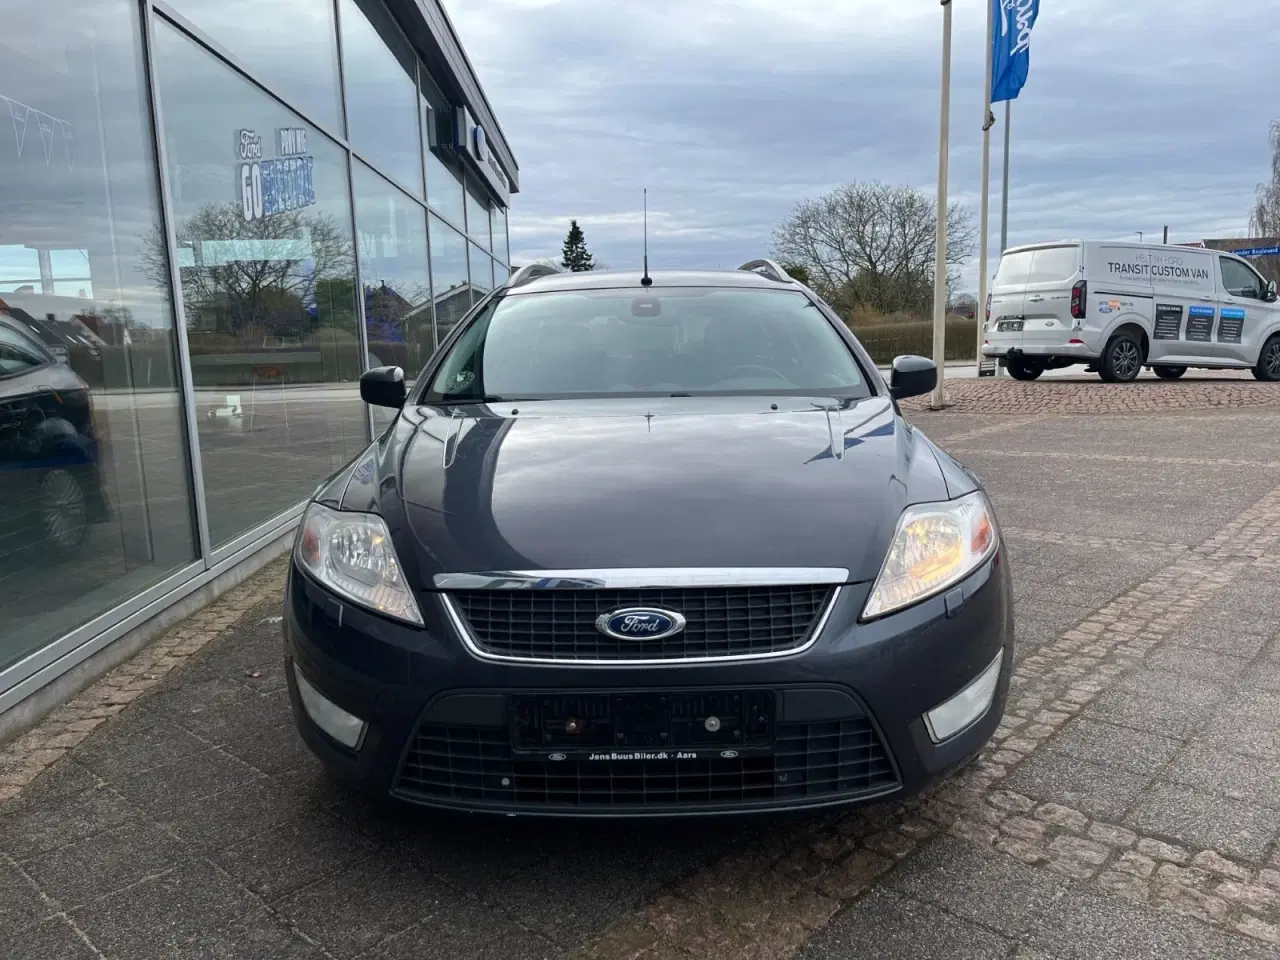 Billede 7 - Ford Mondeo 2,0 TDCi 115 ECOnetic stc.